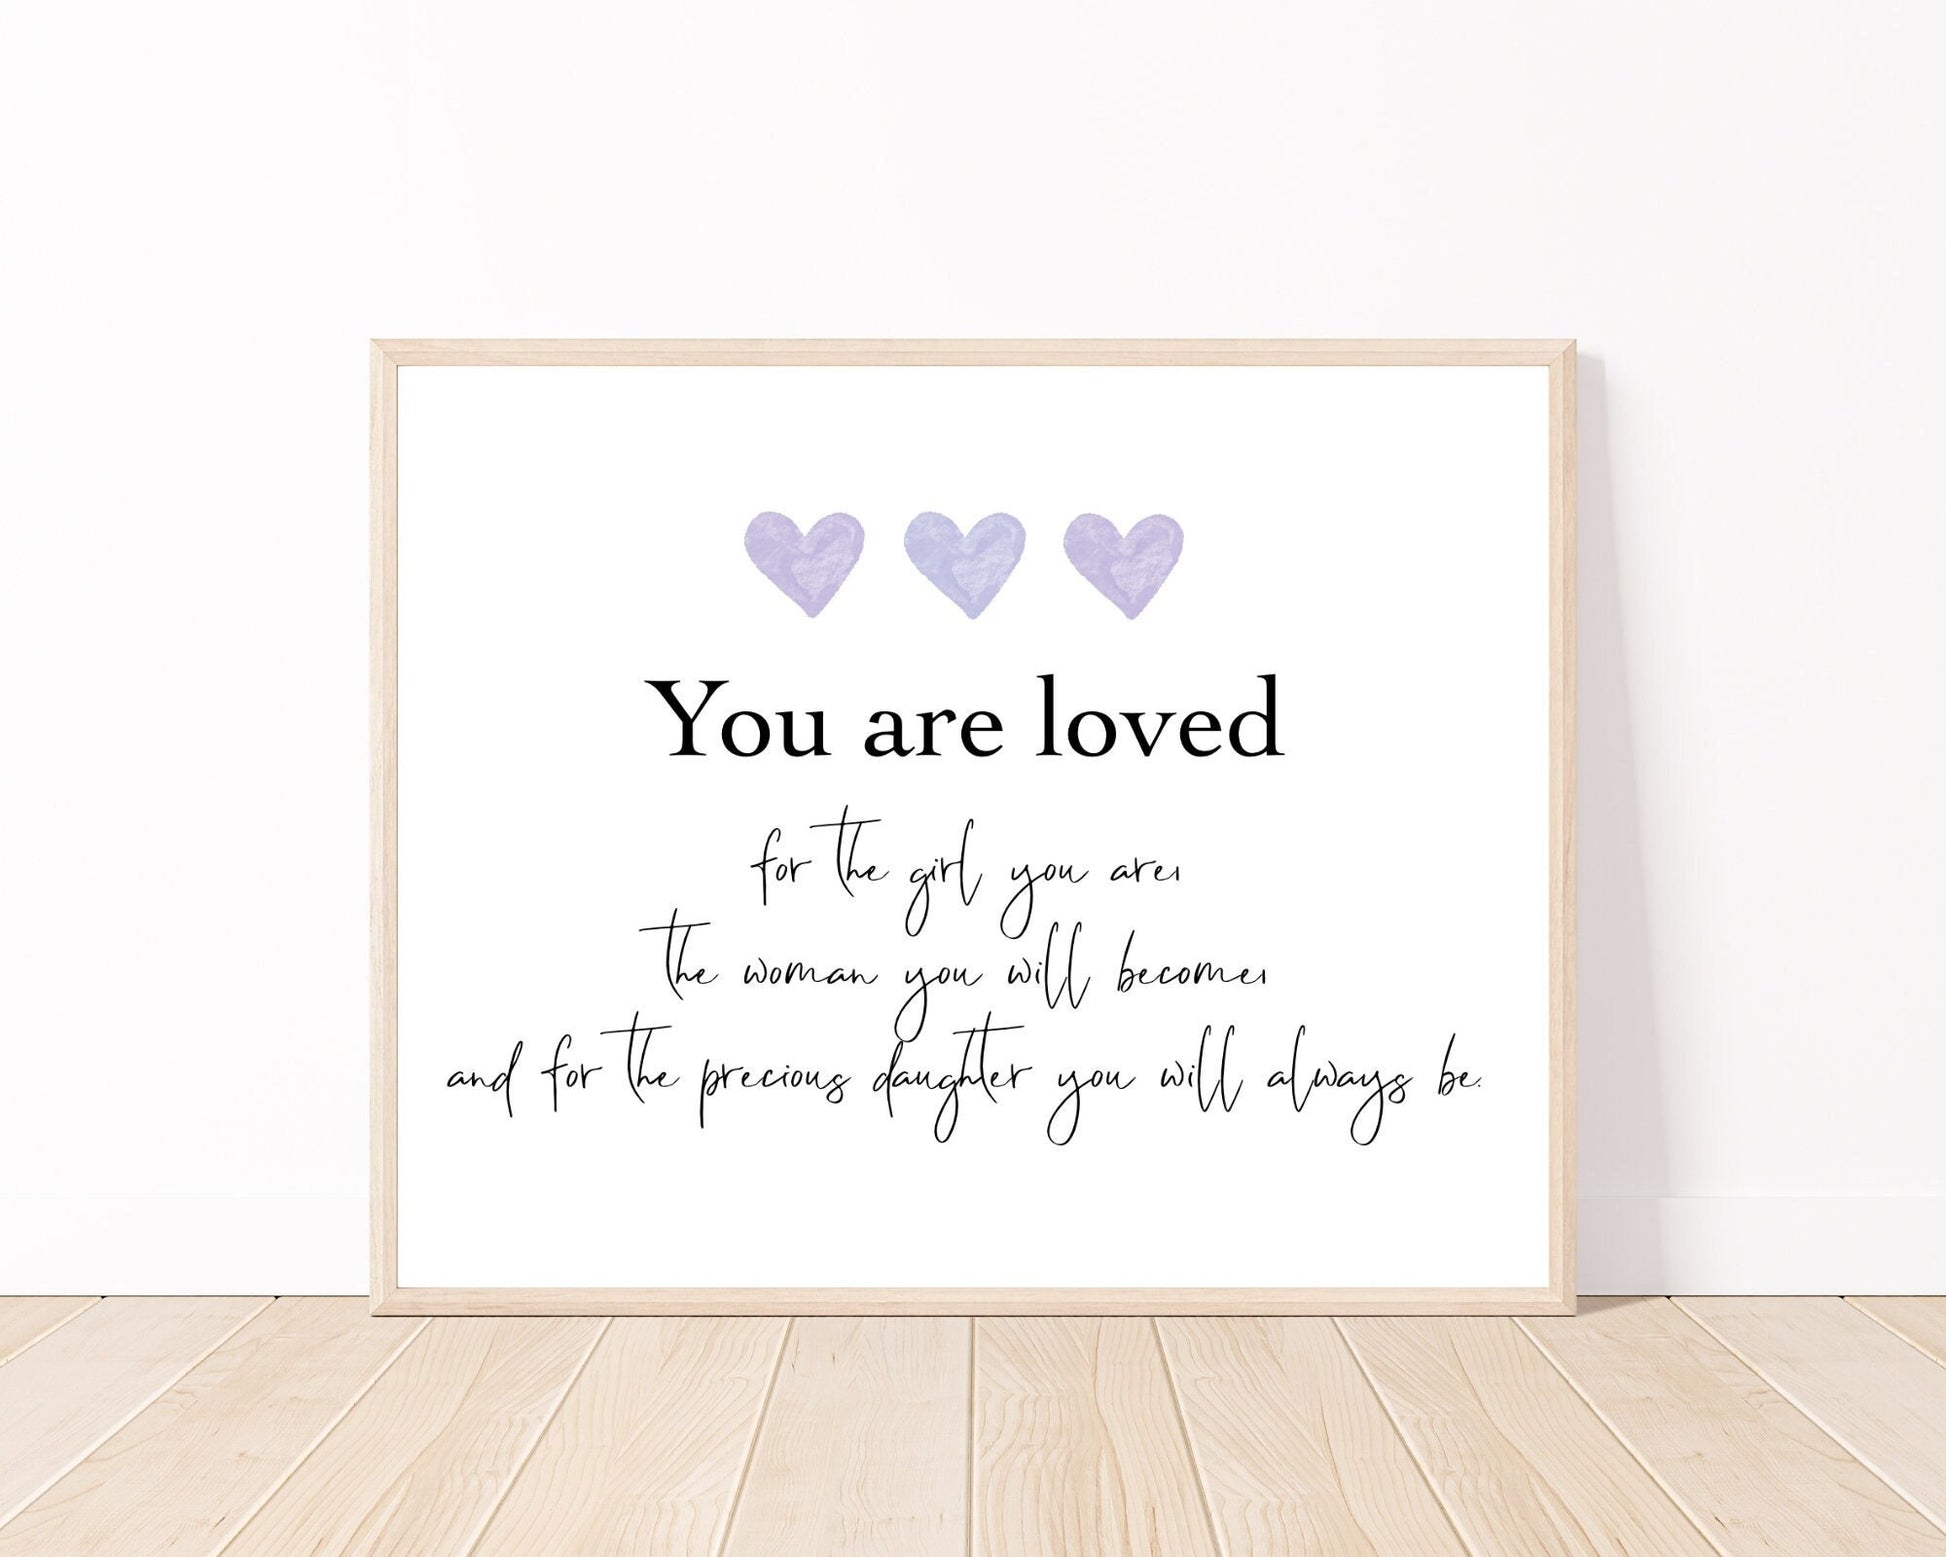 A little girl’s room digital poster that is placed on a white wall and parquet flooring and has three purple hearts at the top with a piece of writing that says: “You are loved for the girl you are, the woman you will become, and for the precious daughter you will always be.”